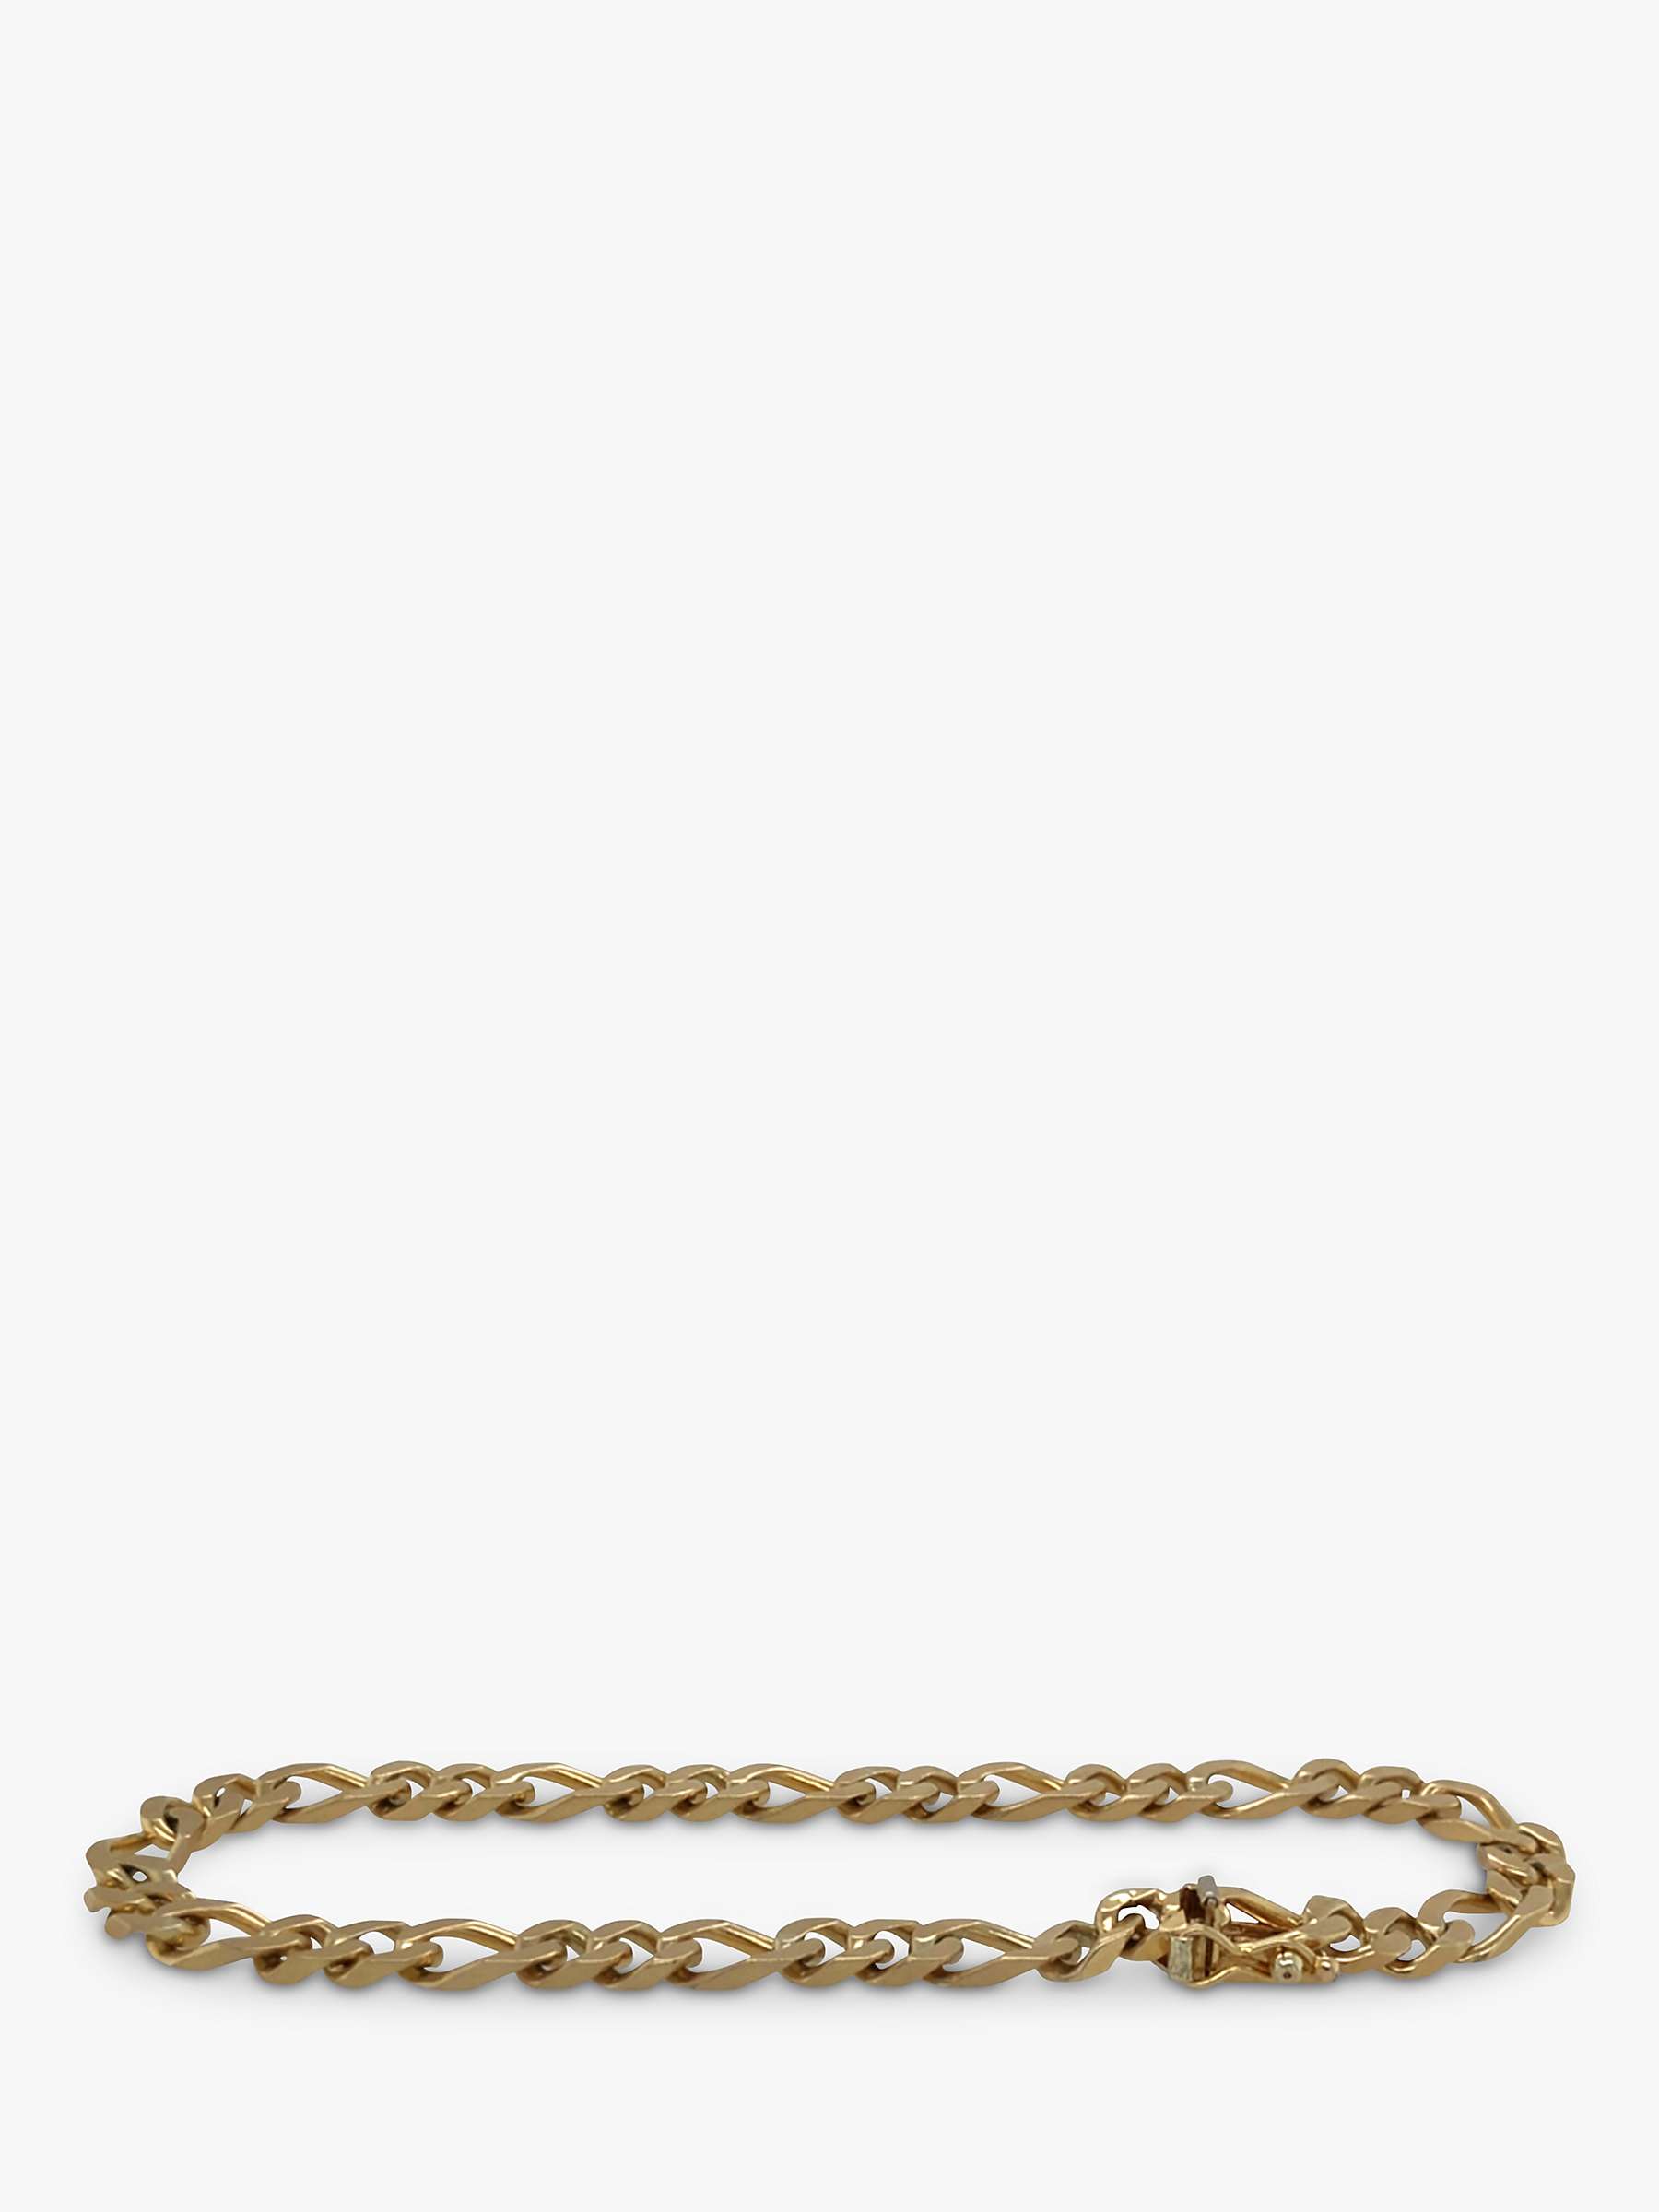 Buy Vintage Fine Jewellery Second Hand 9ct Yellow Gold Curb & Figaro Chain Link Bracelet, Dated London 1986 Online at johnlewis.com